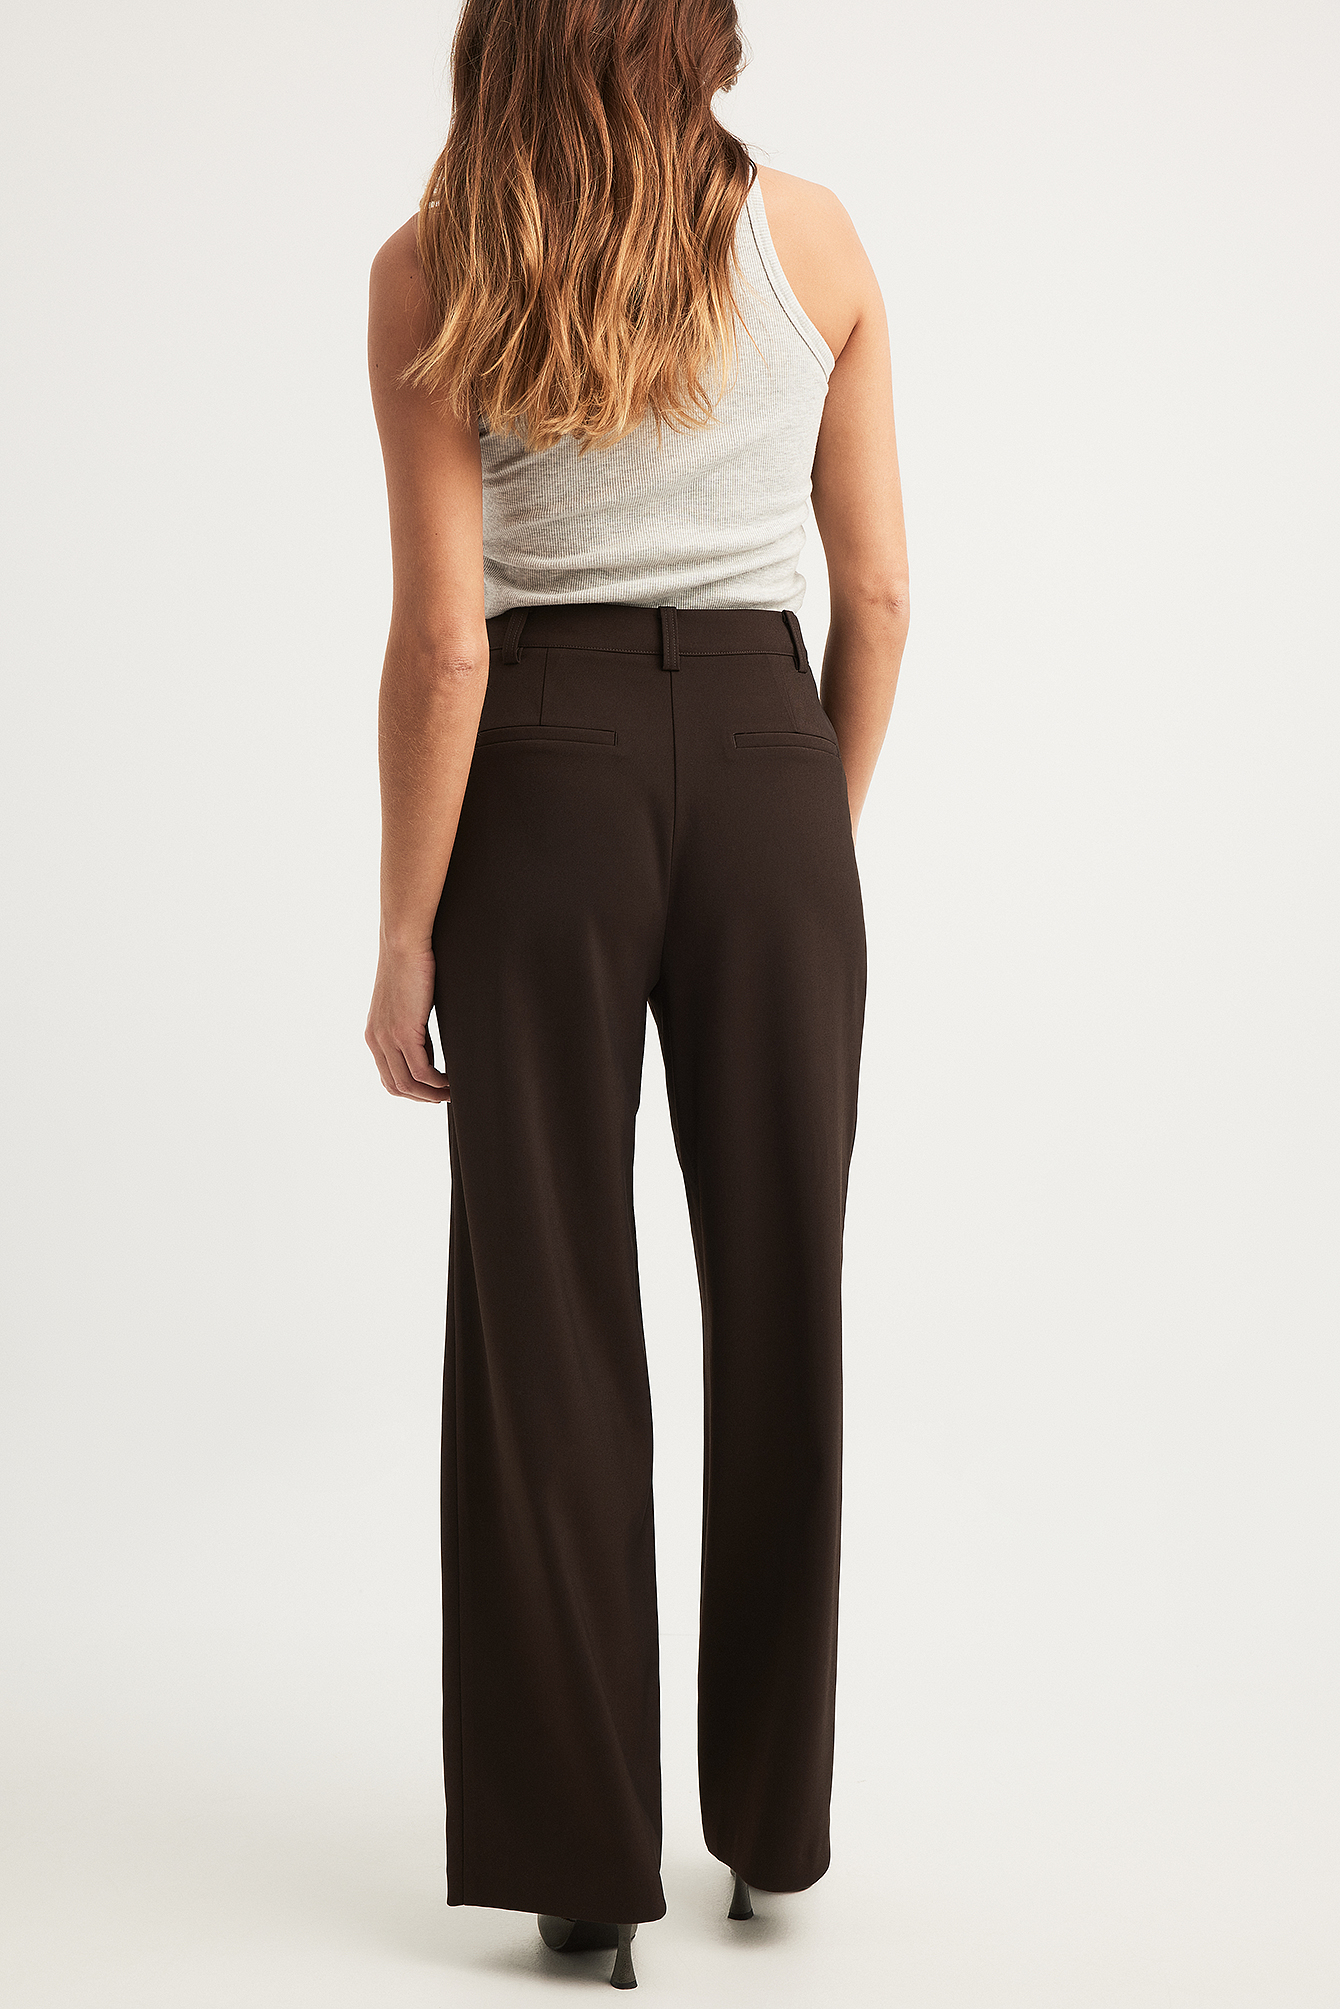 Buy Brown Trousers & Pants for Women by FREEHAND Online | Ajio.com